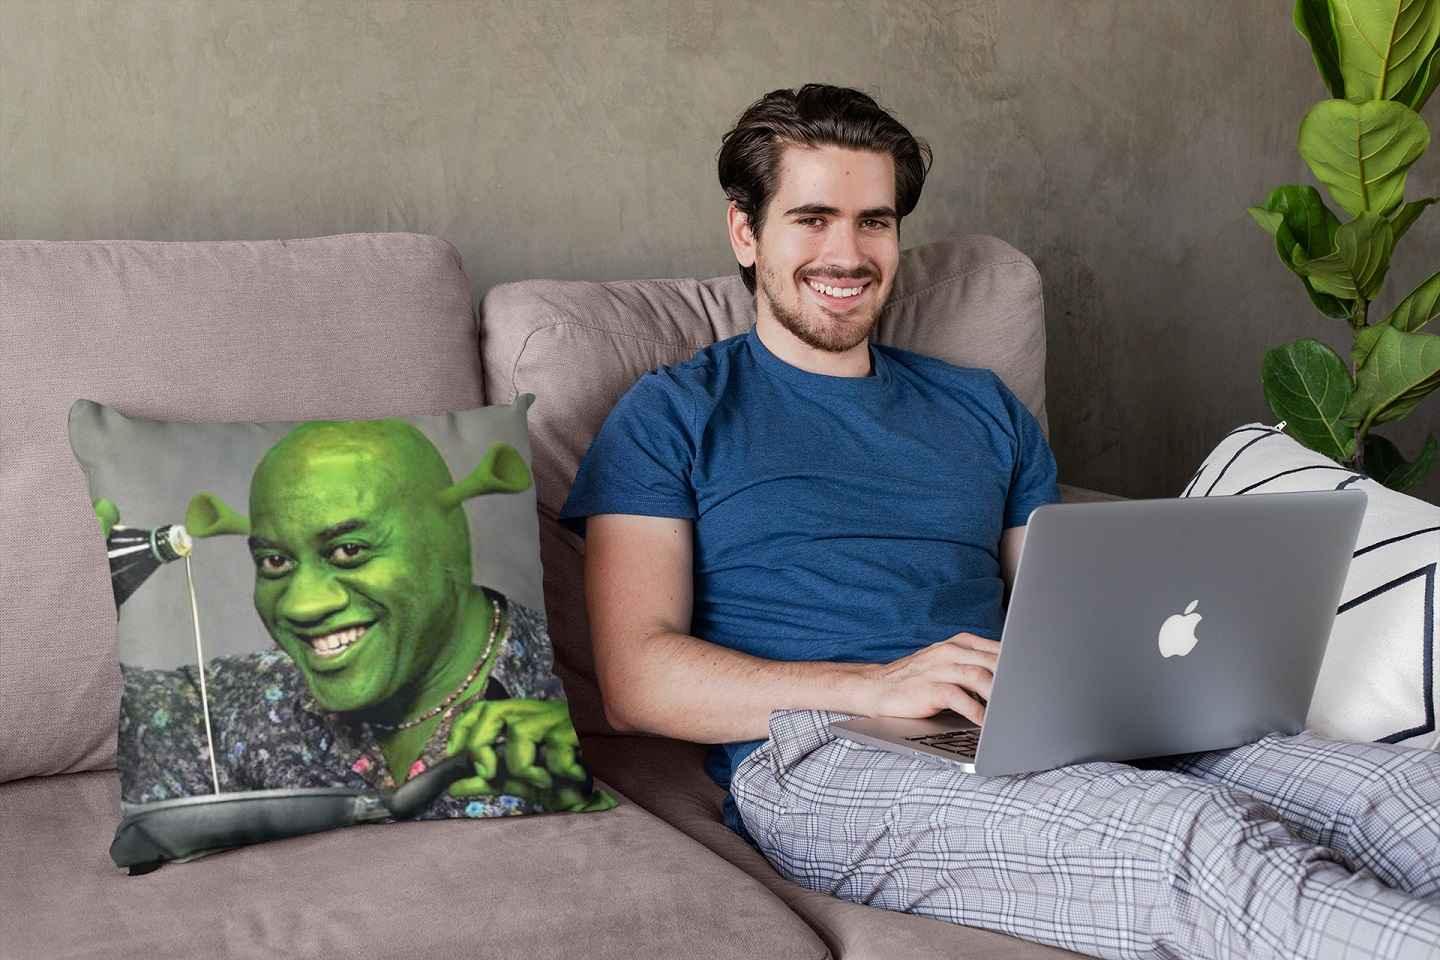 A smiling young man with a laptop sitting next to an Ainsley Harriott Shrek throw pillow.